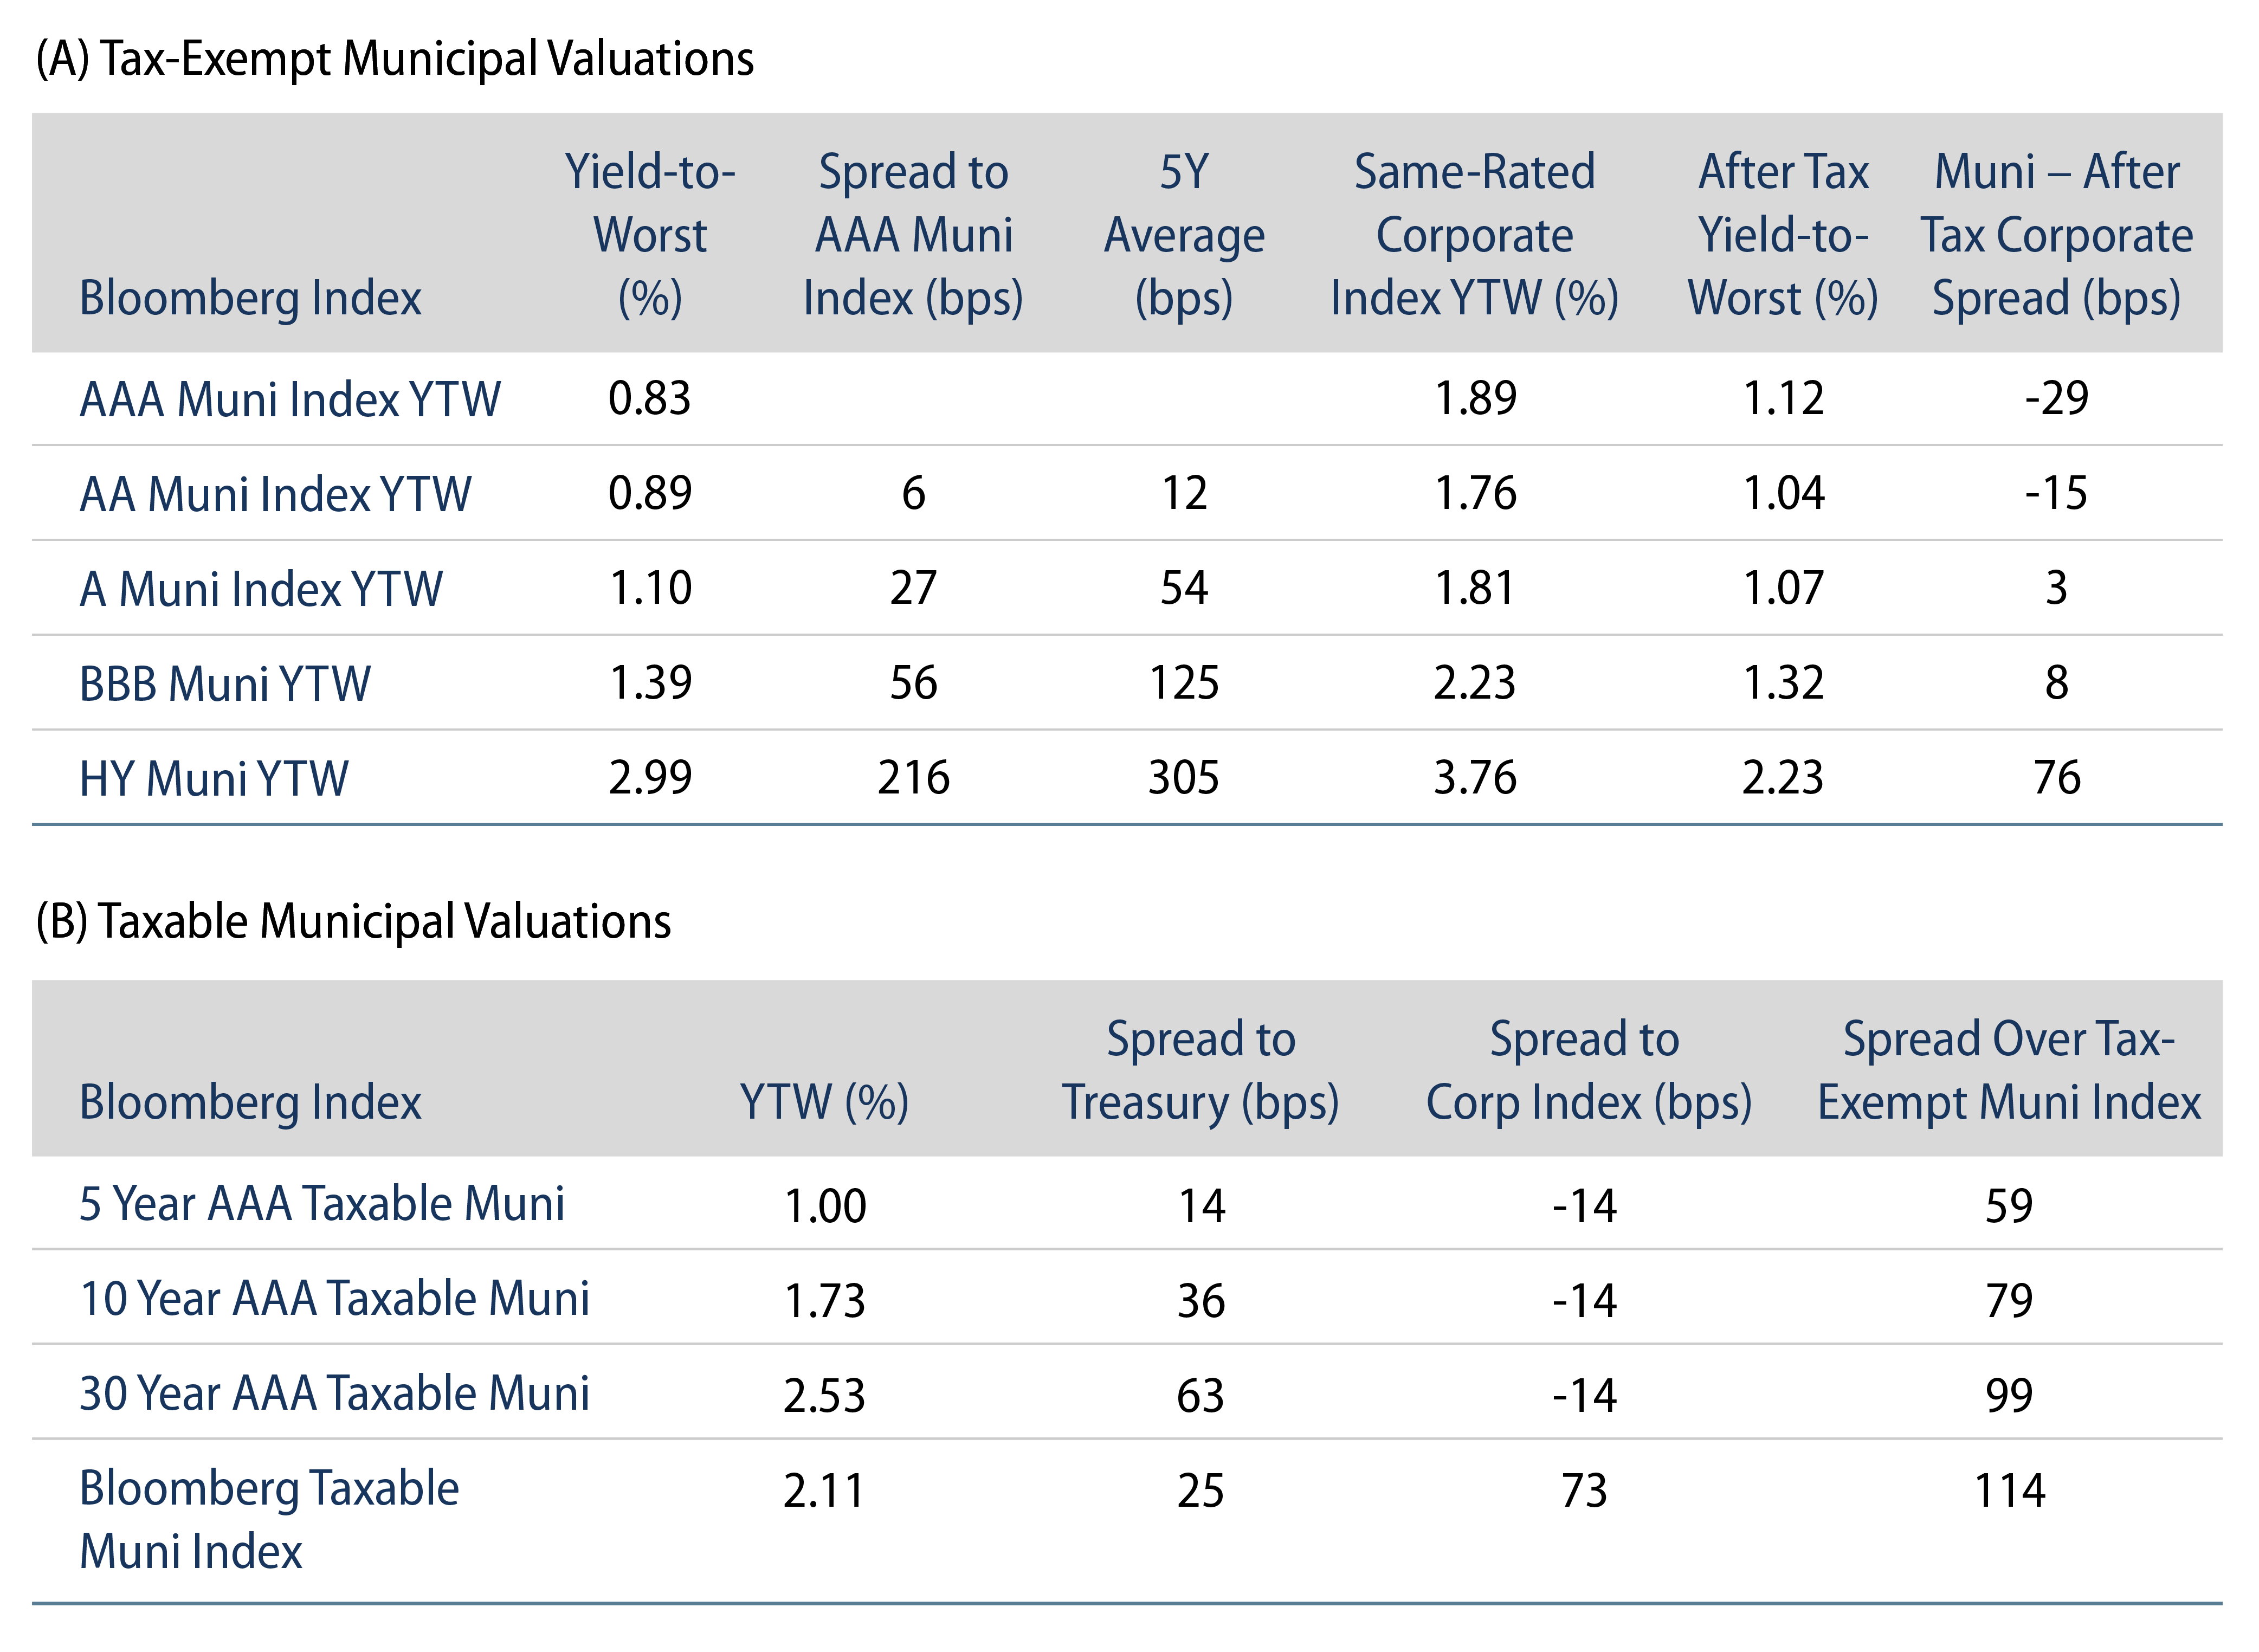  Tax-Exempt and Taxable Municipal Valuations